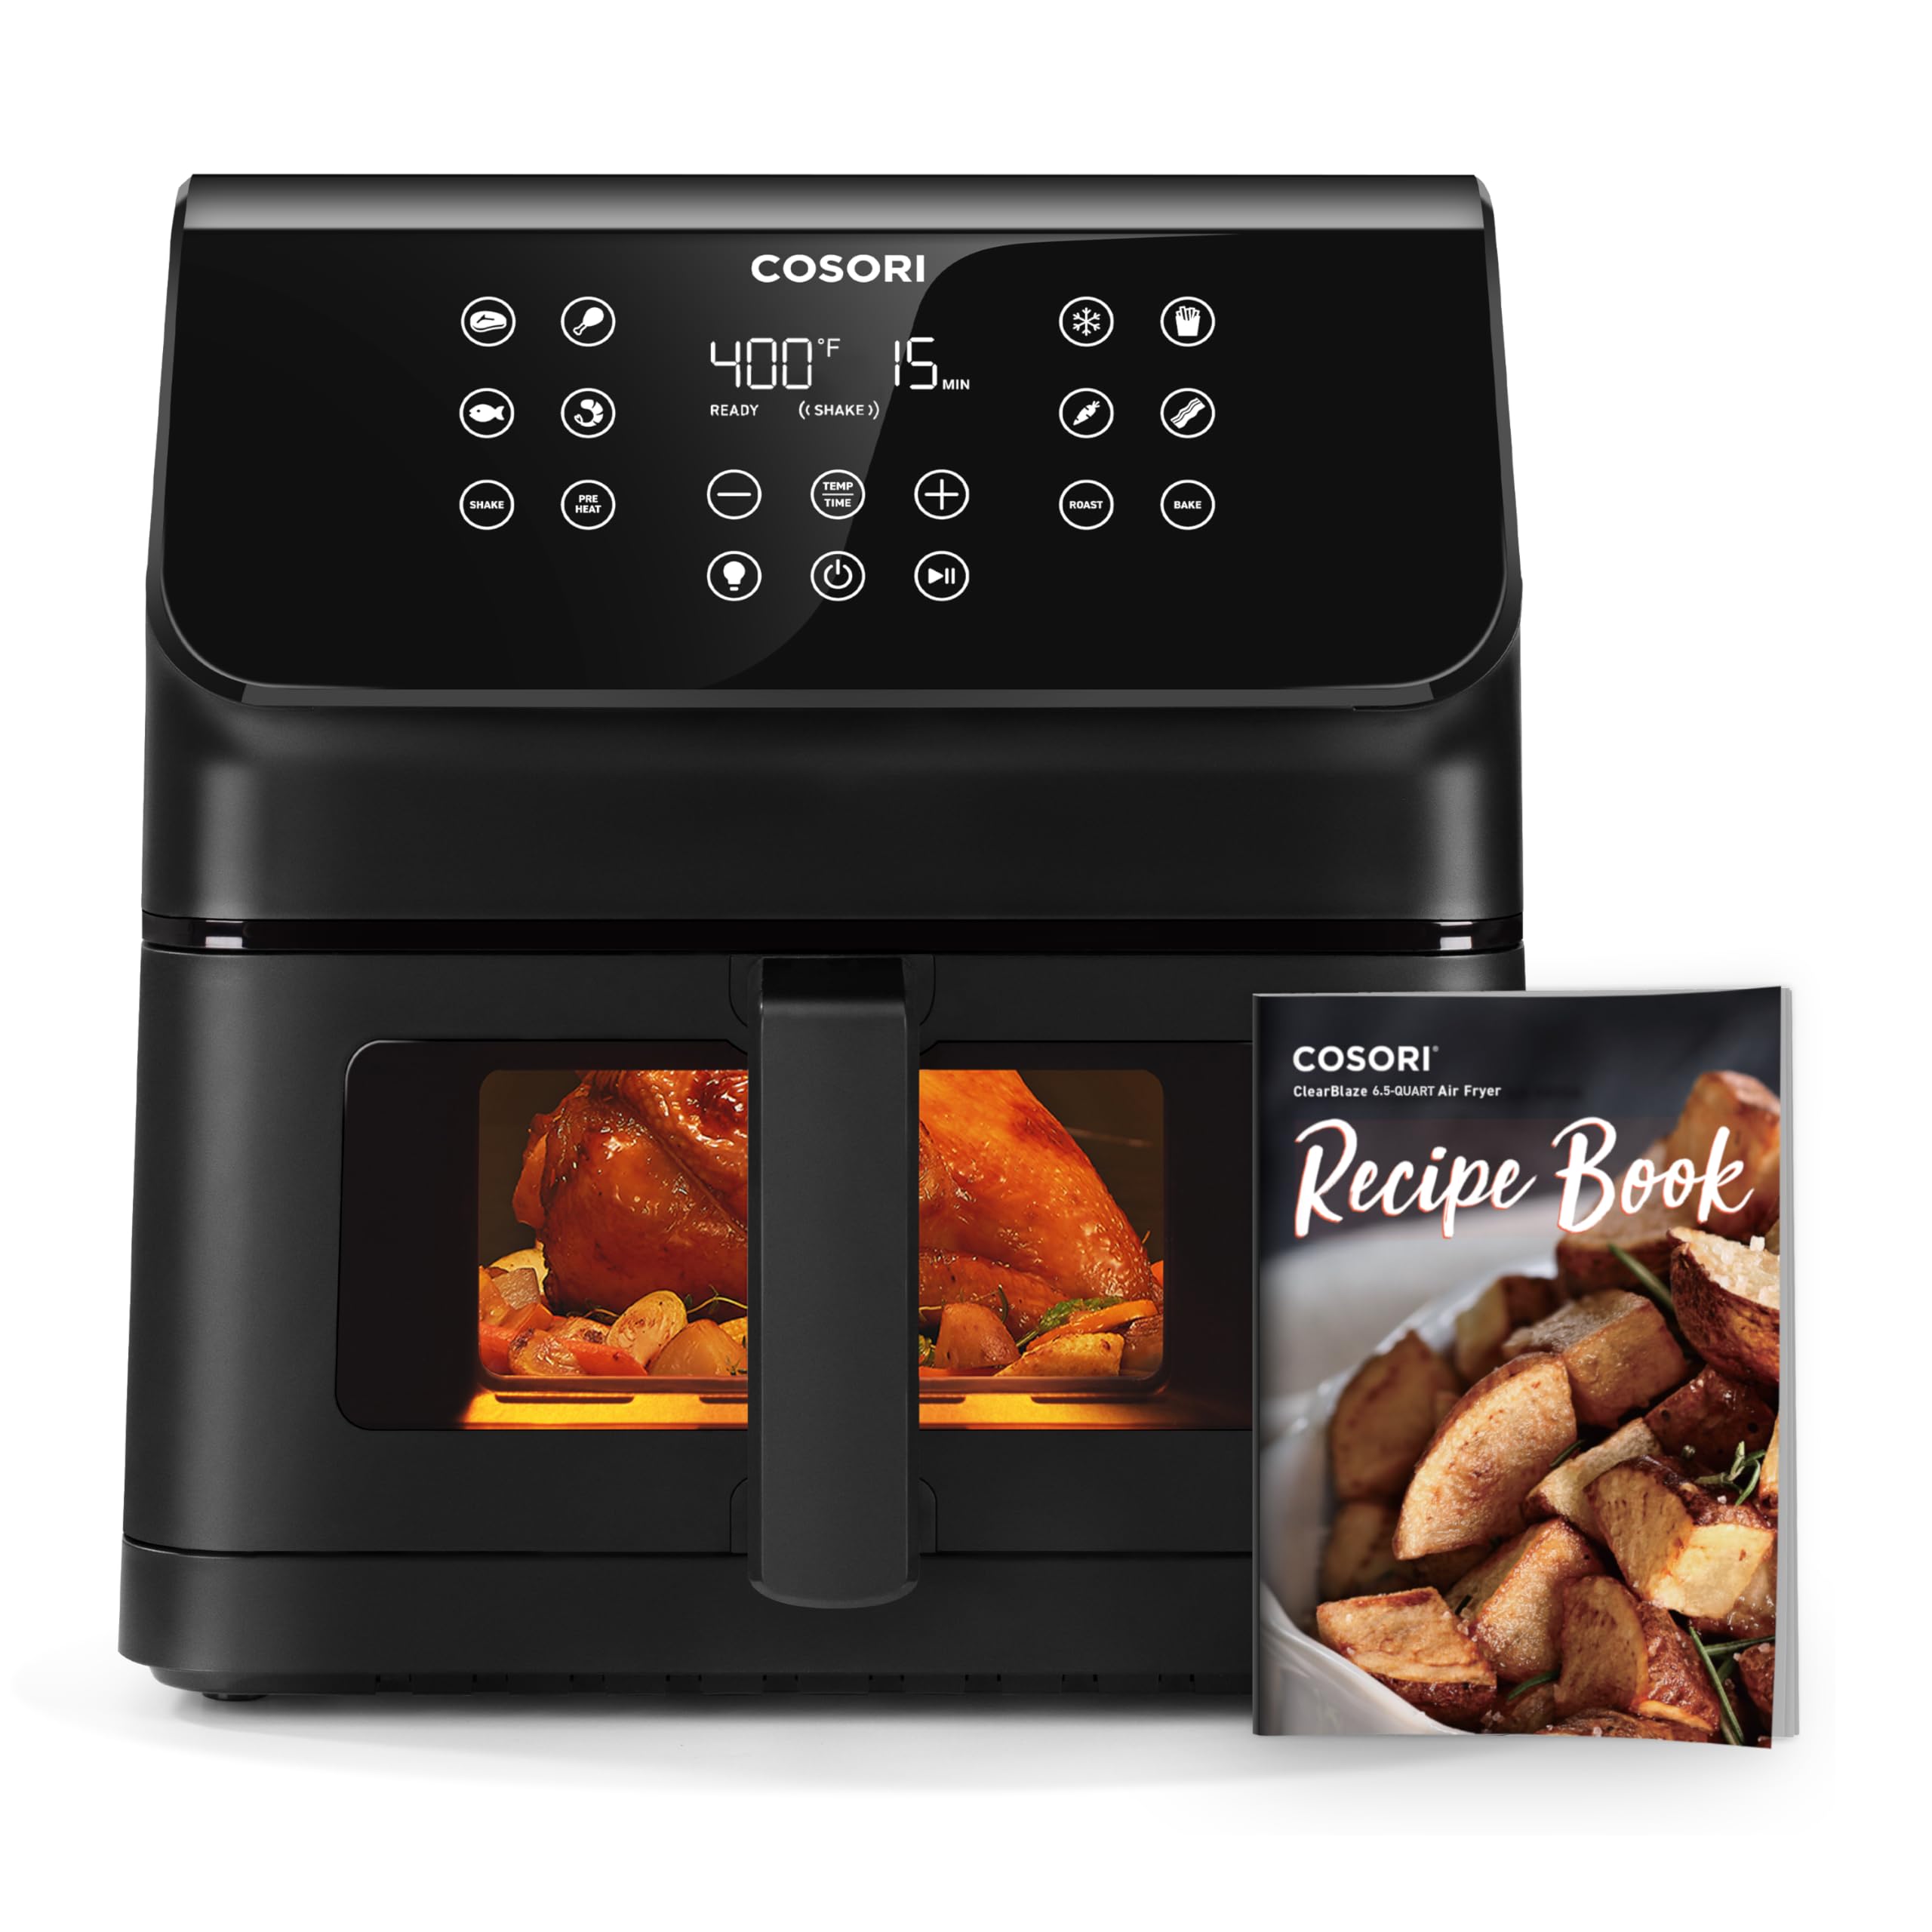 COSORI Clear Blaze Air Fryer, 6.5 Quart Large Compact Airfryer with Visible Window, 12 One-Touch Savable Custom Functions, Cookbooks and Online Recipes, Nonstick and Dishwasher-Safe